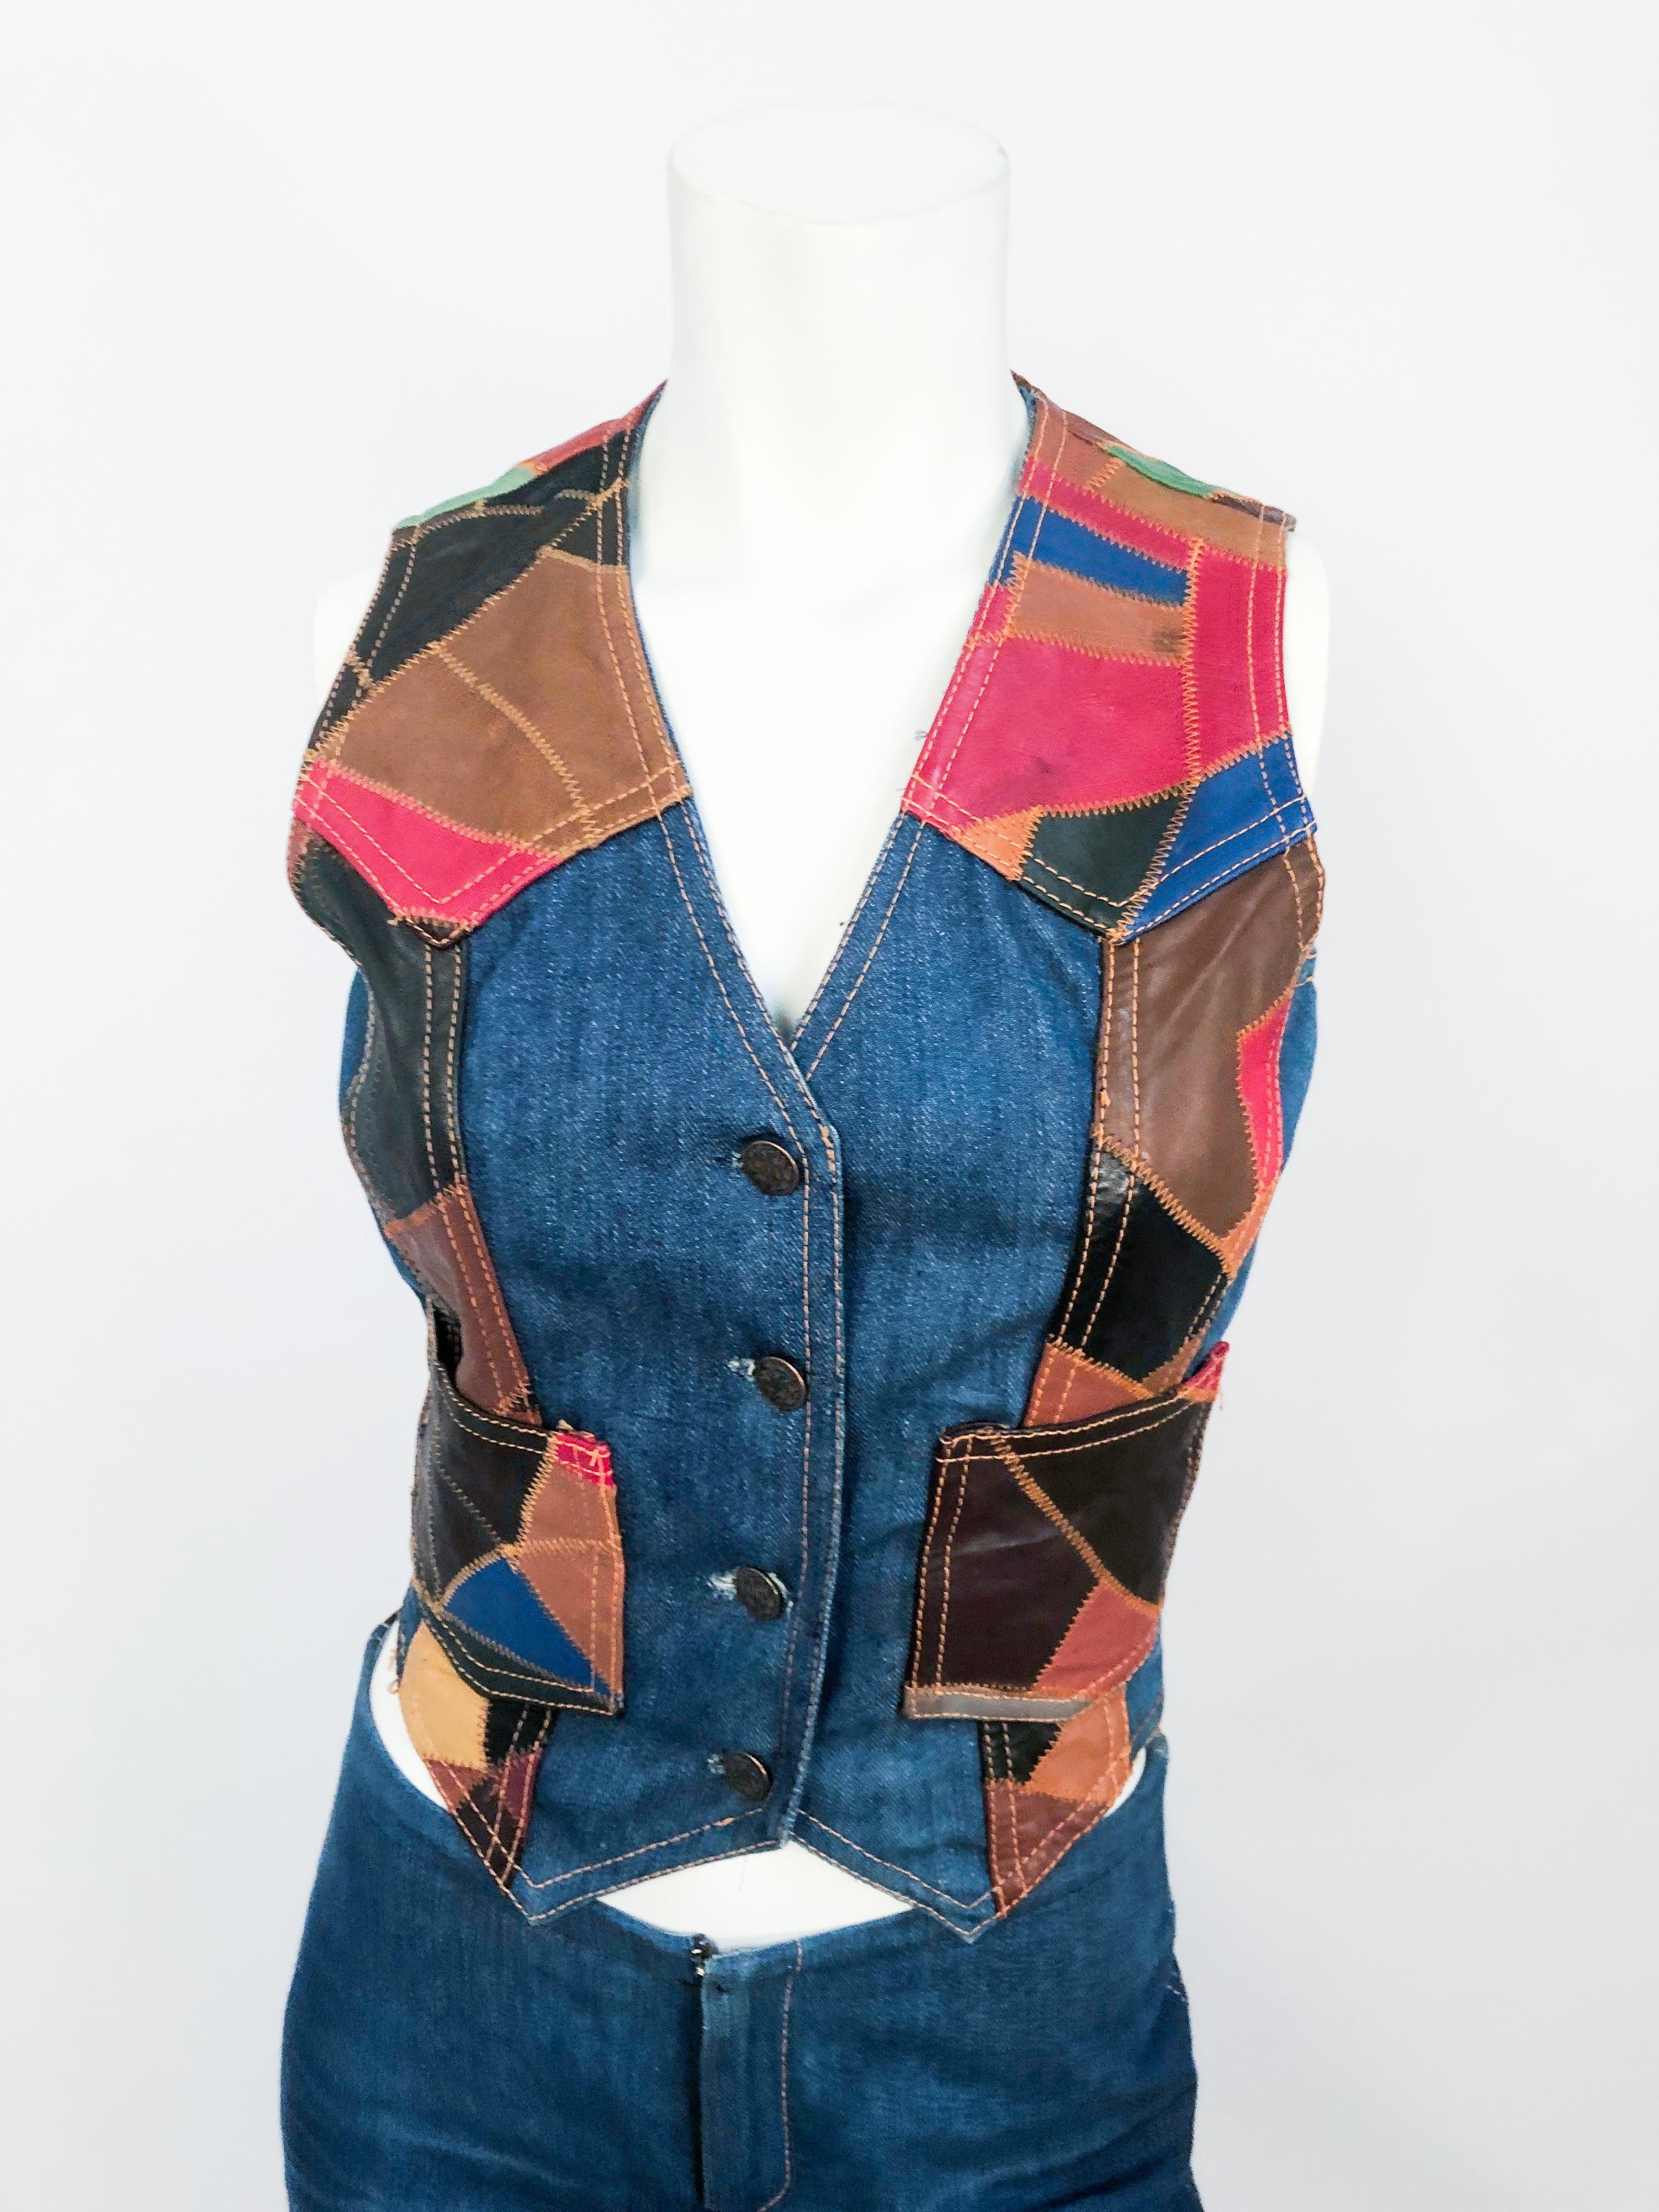 1970s Denim Set Featuring Multicolored Patch Work 1